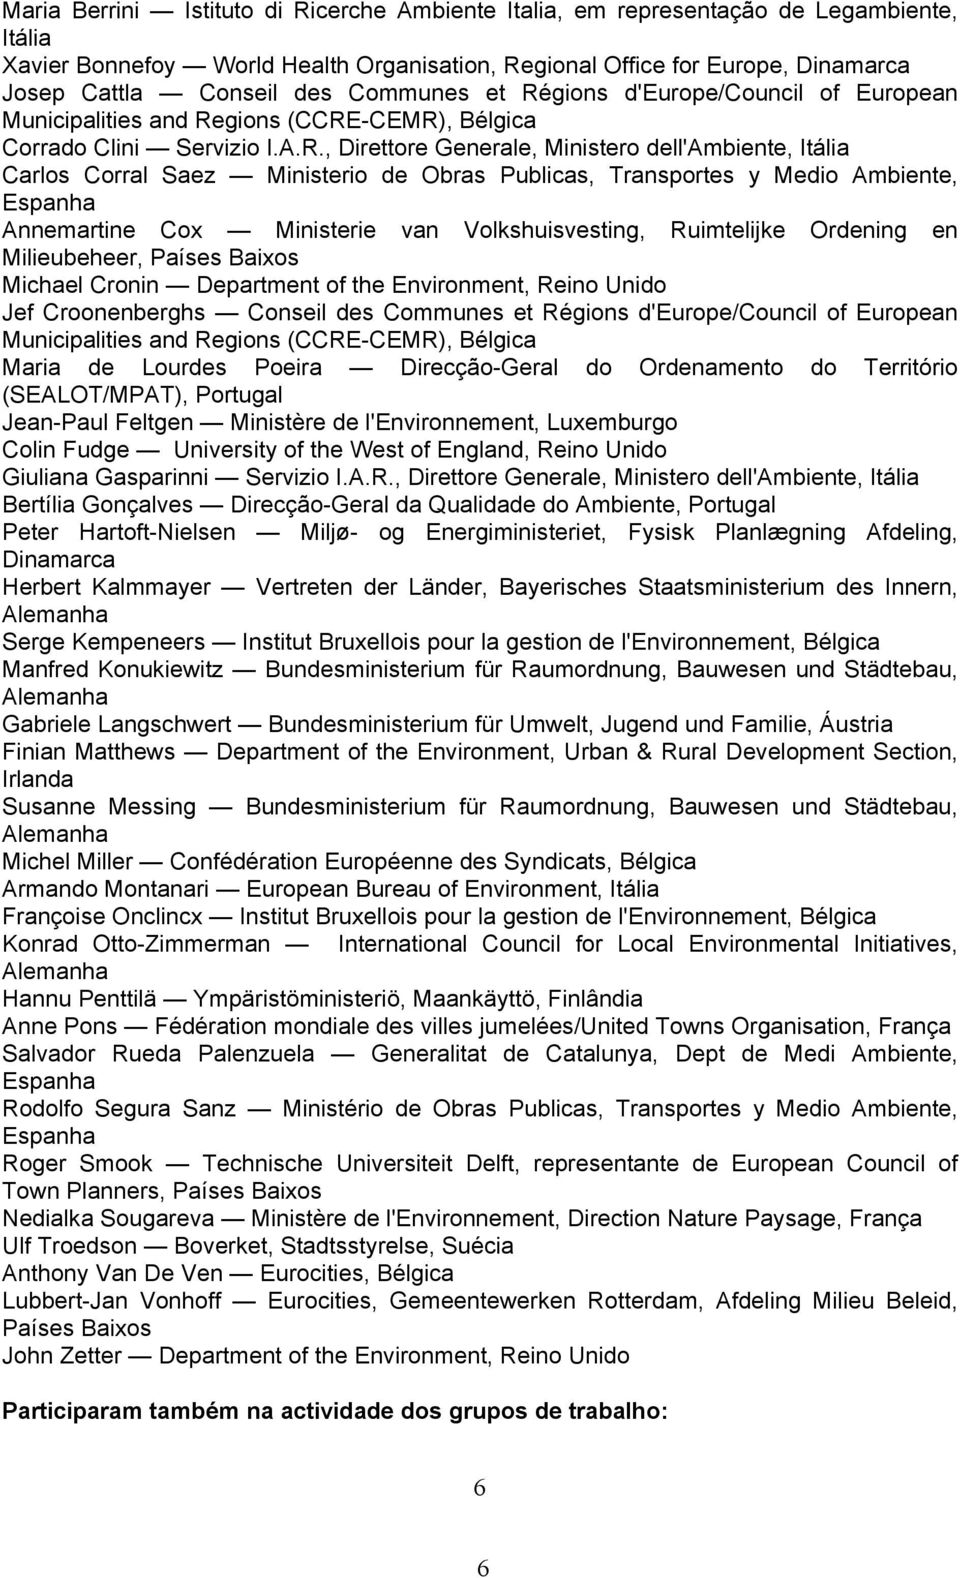 gions d'europe/council of European Municipalities and Re